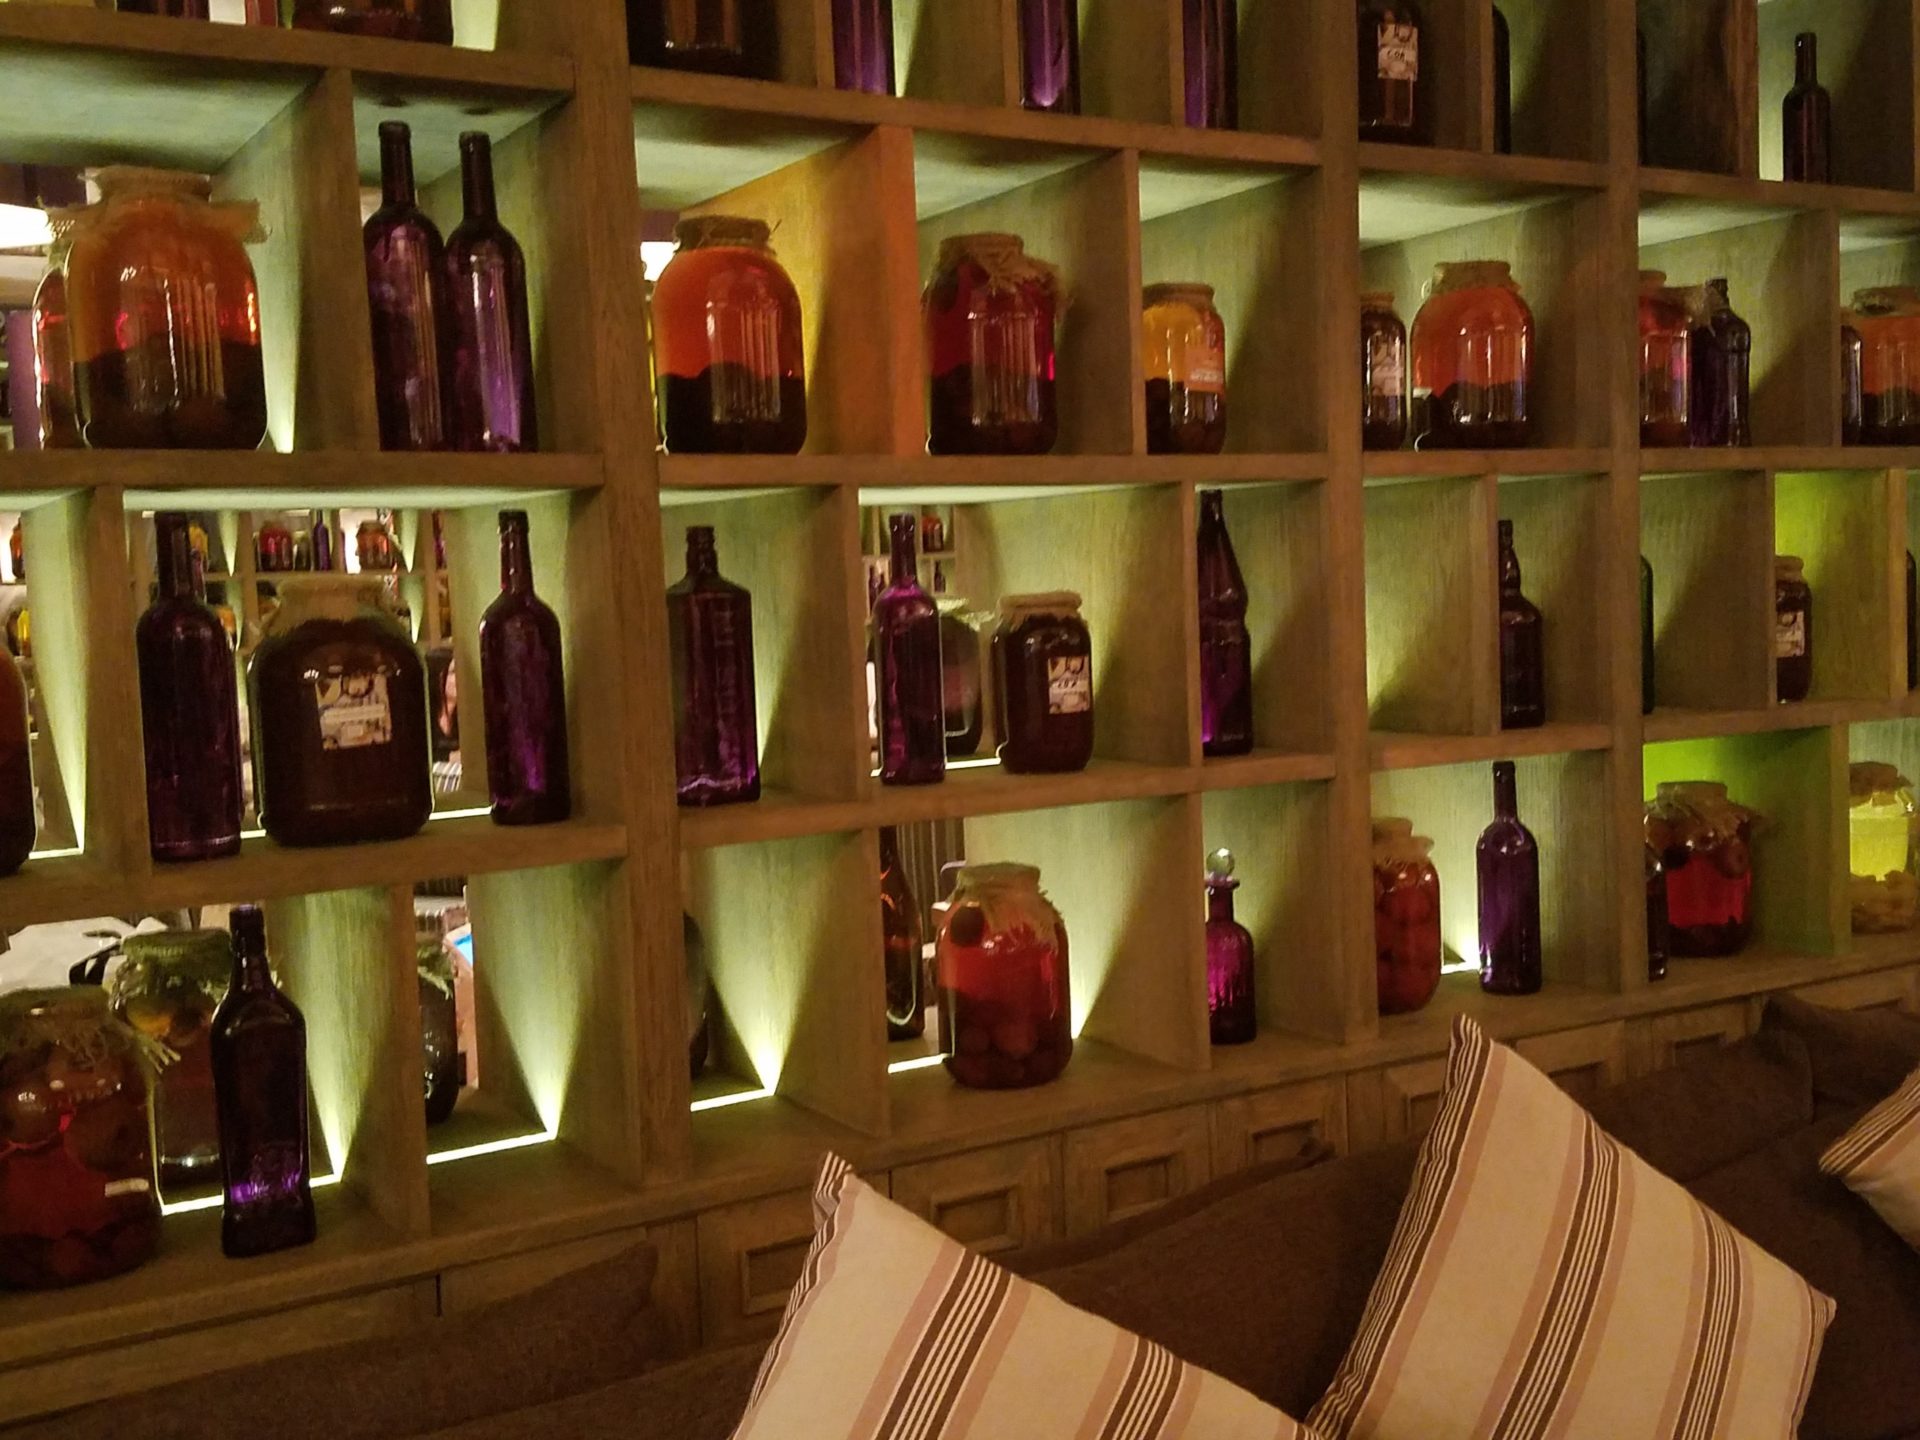 a shelf with bottles and jars on it